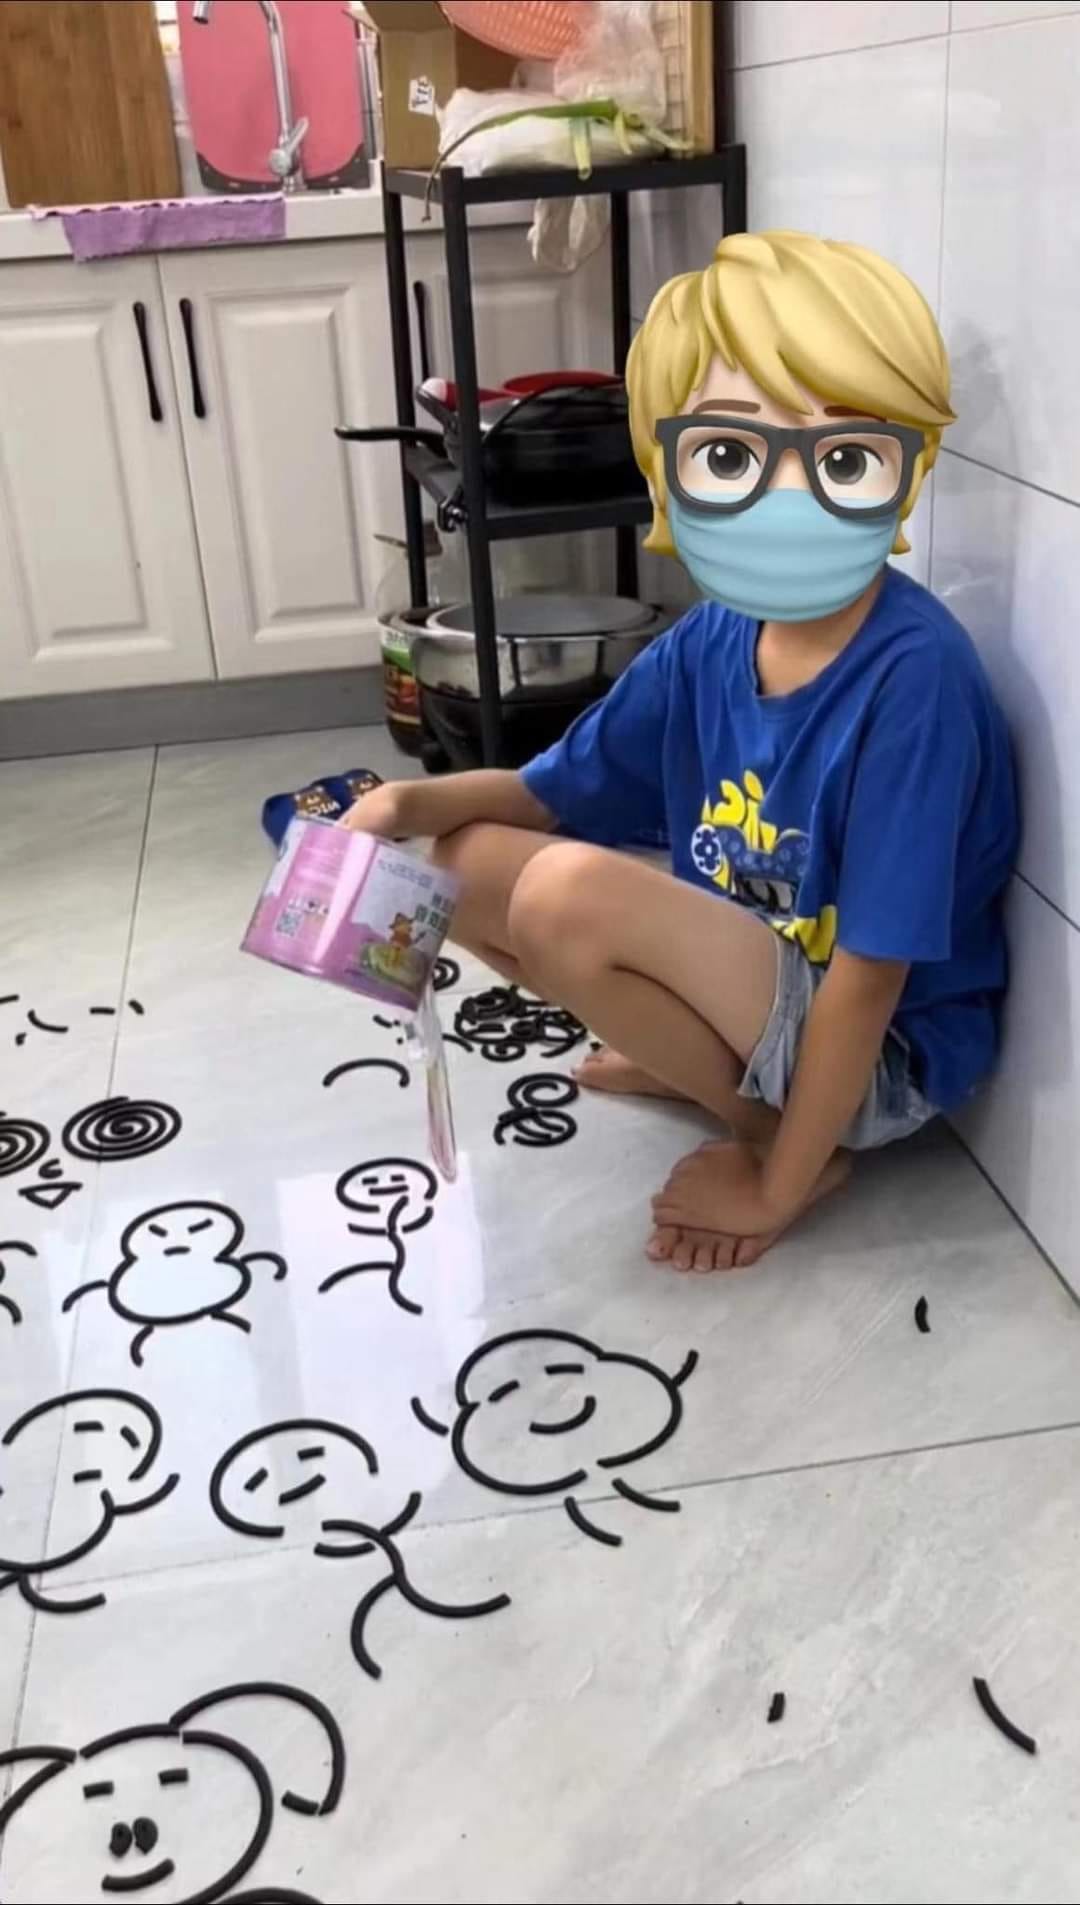 M'sian boy uses mosquito coils to create cute arts, wins praises online 1